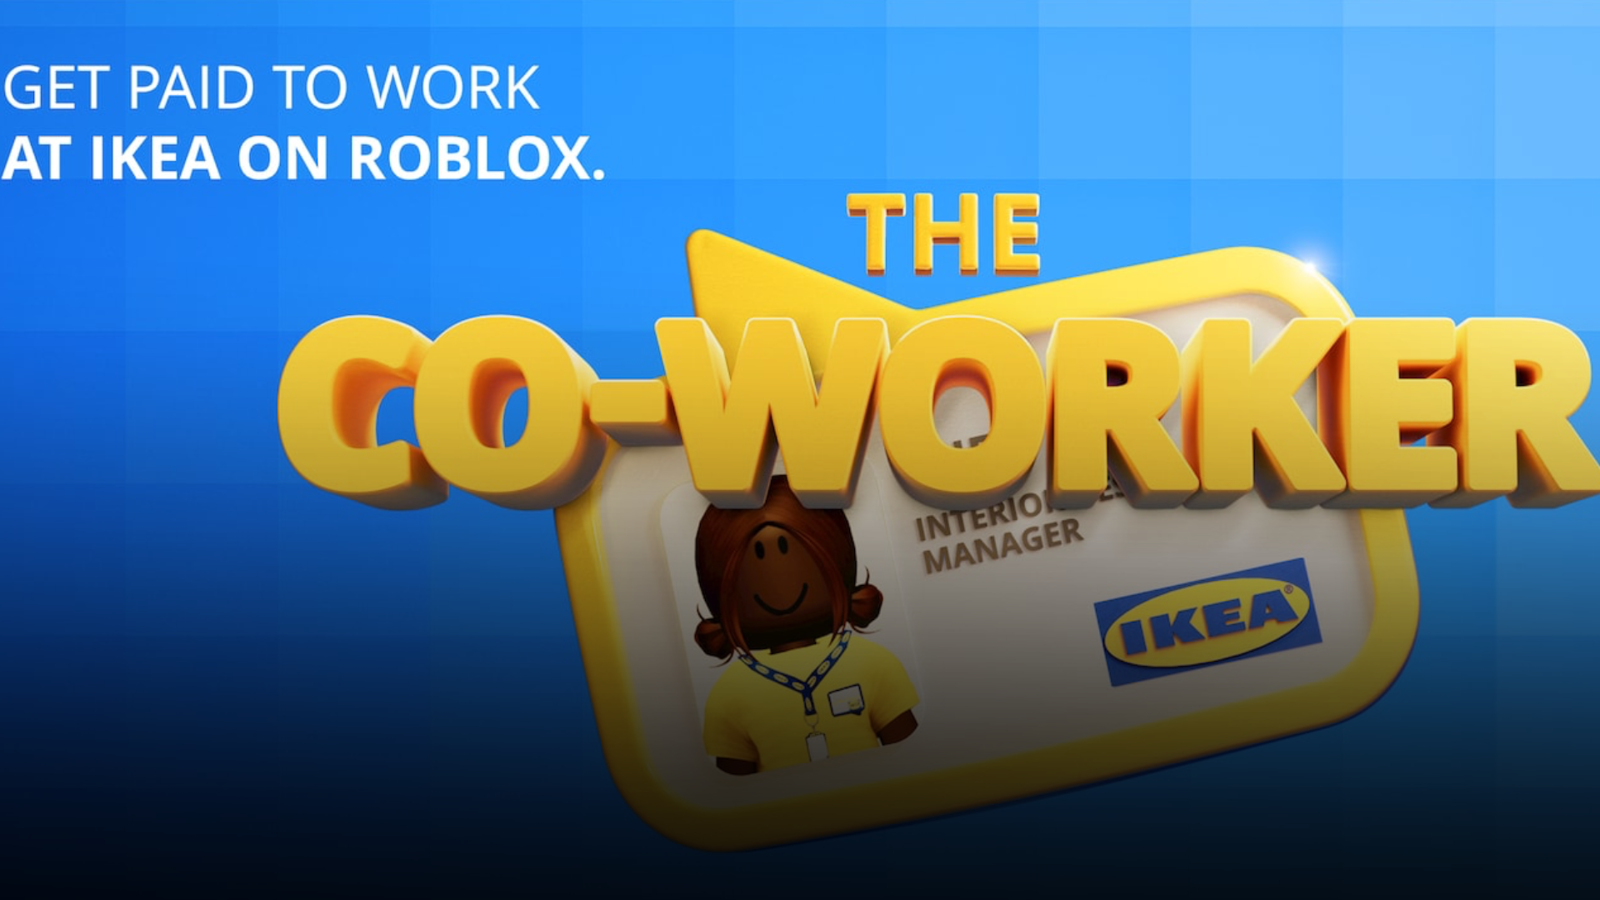 Roblox Joins IKEA in Incredible Gaming Offer That Could See You Never Leaving the Game